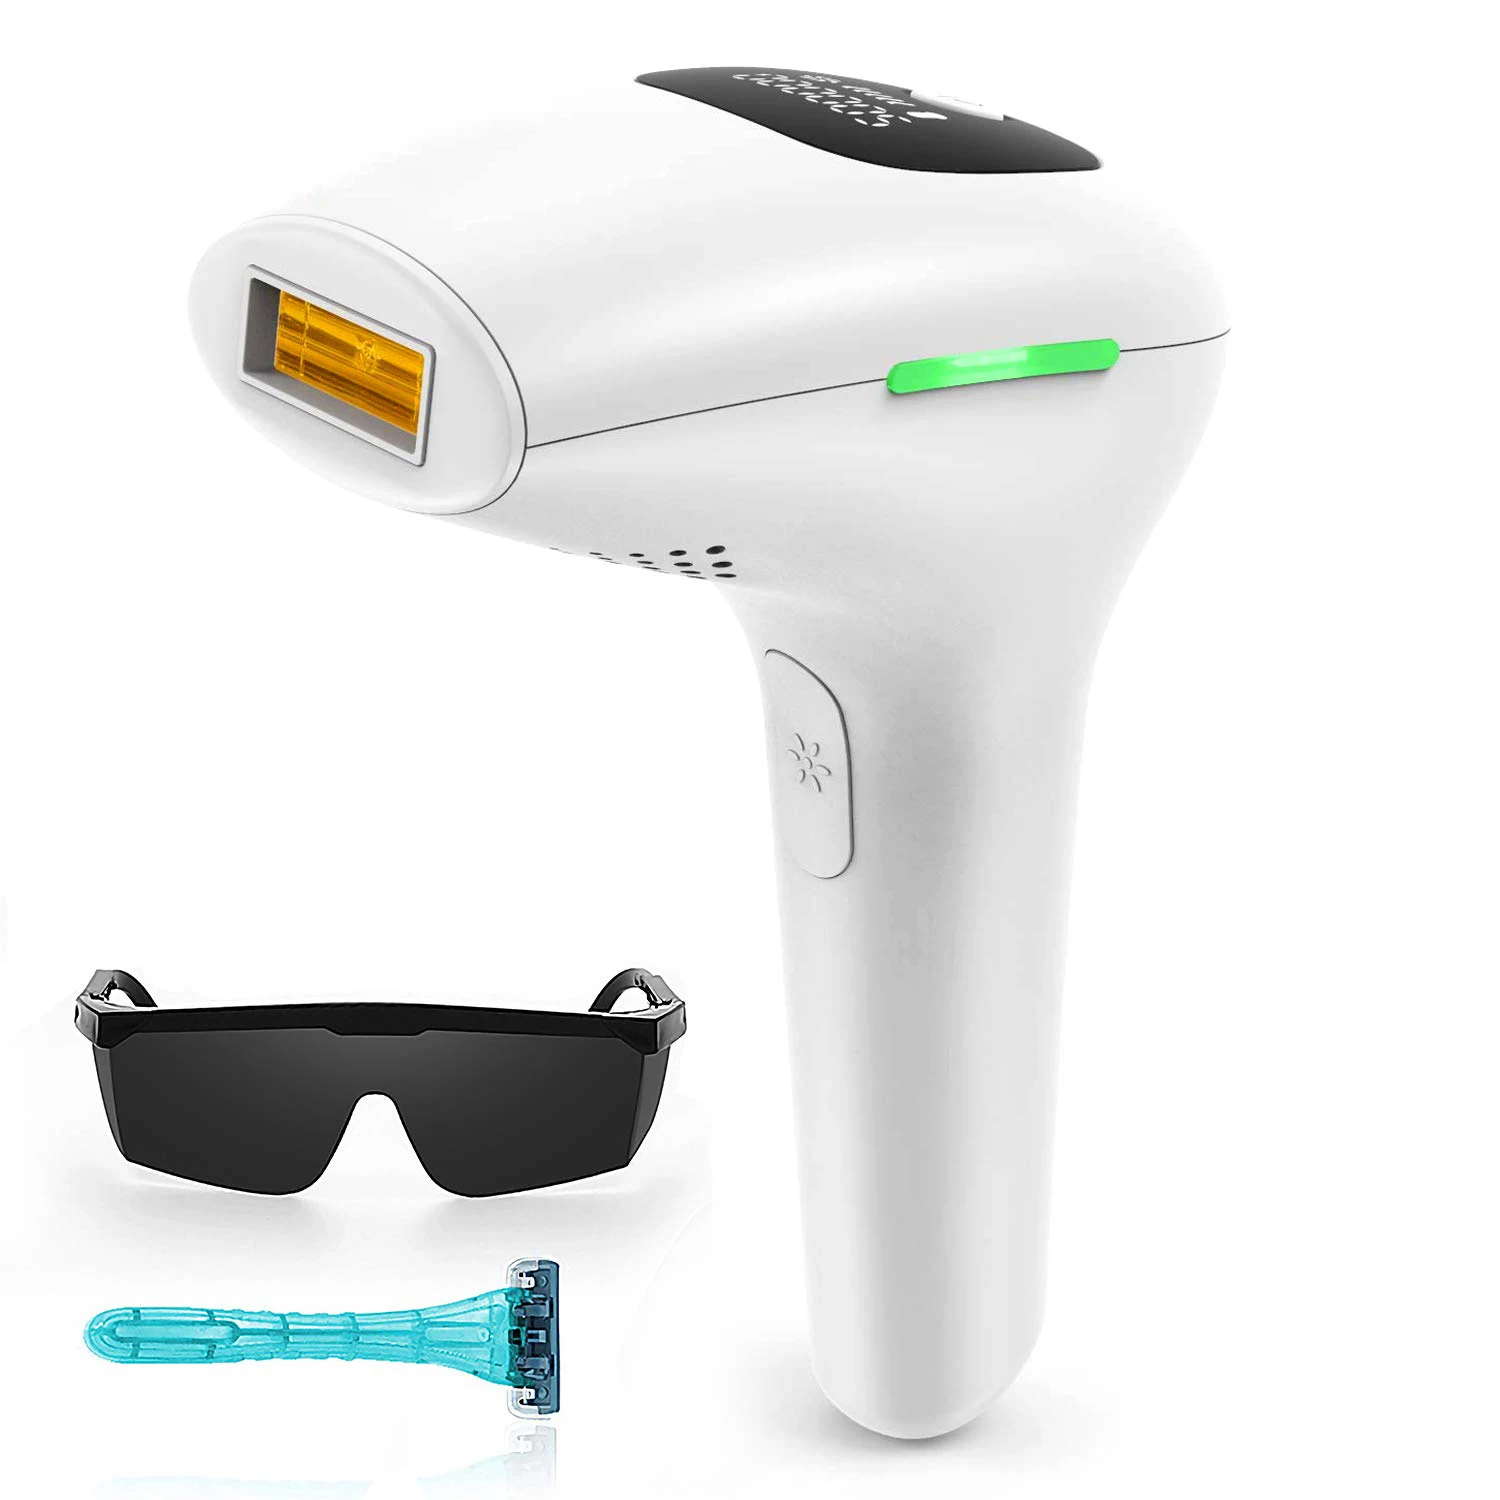 2023 Home Use 990000 Flashes Laser Permanent IPL Hair Removal Device Portable 5 Working Modes Skin Rejuvenation (1600146318898)